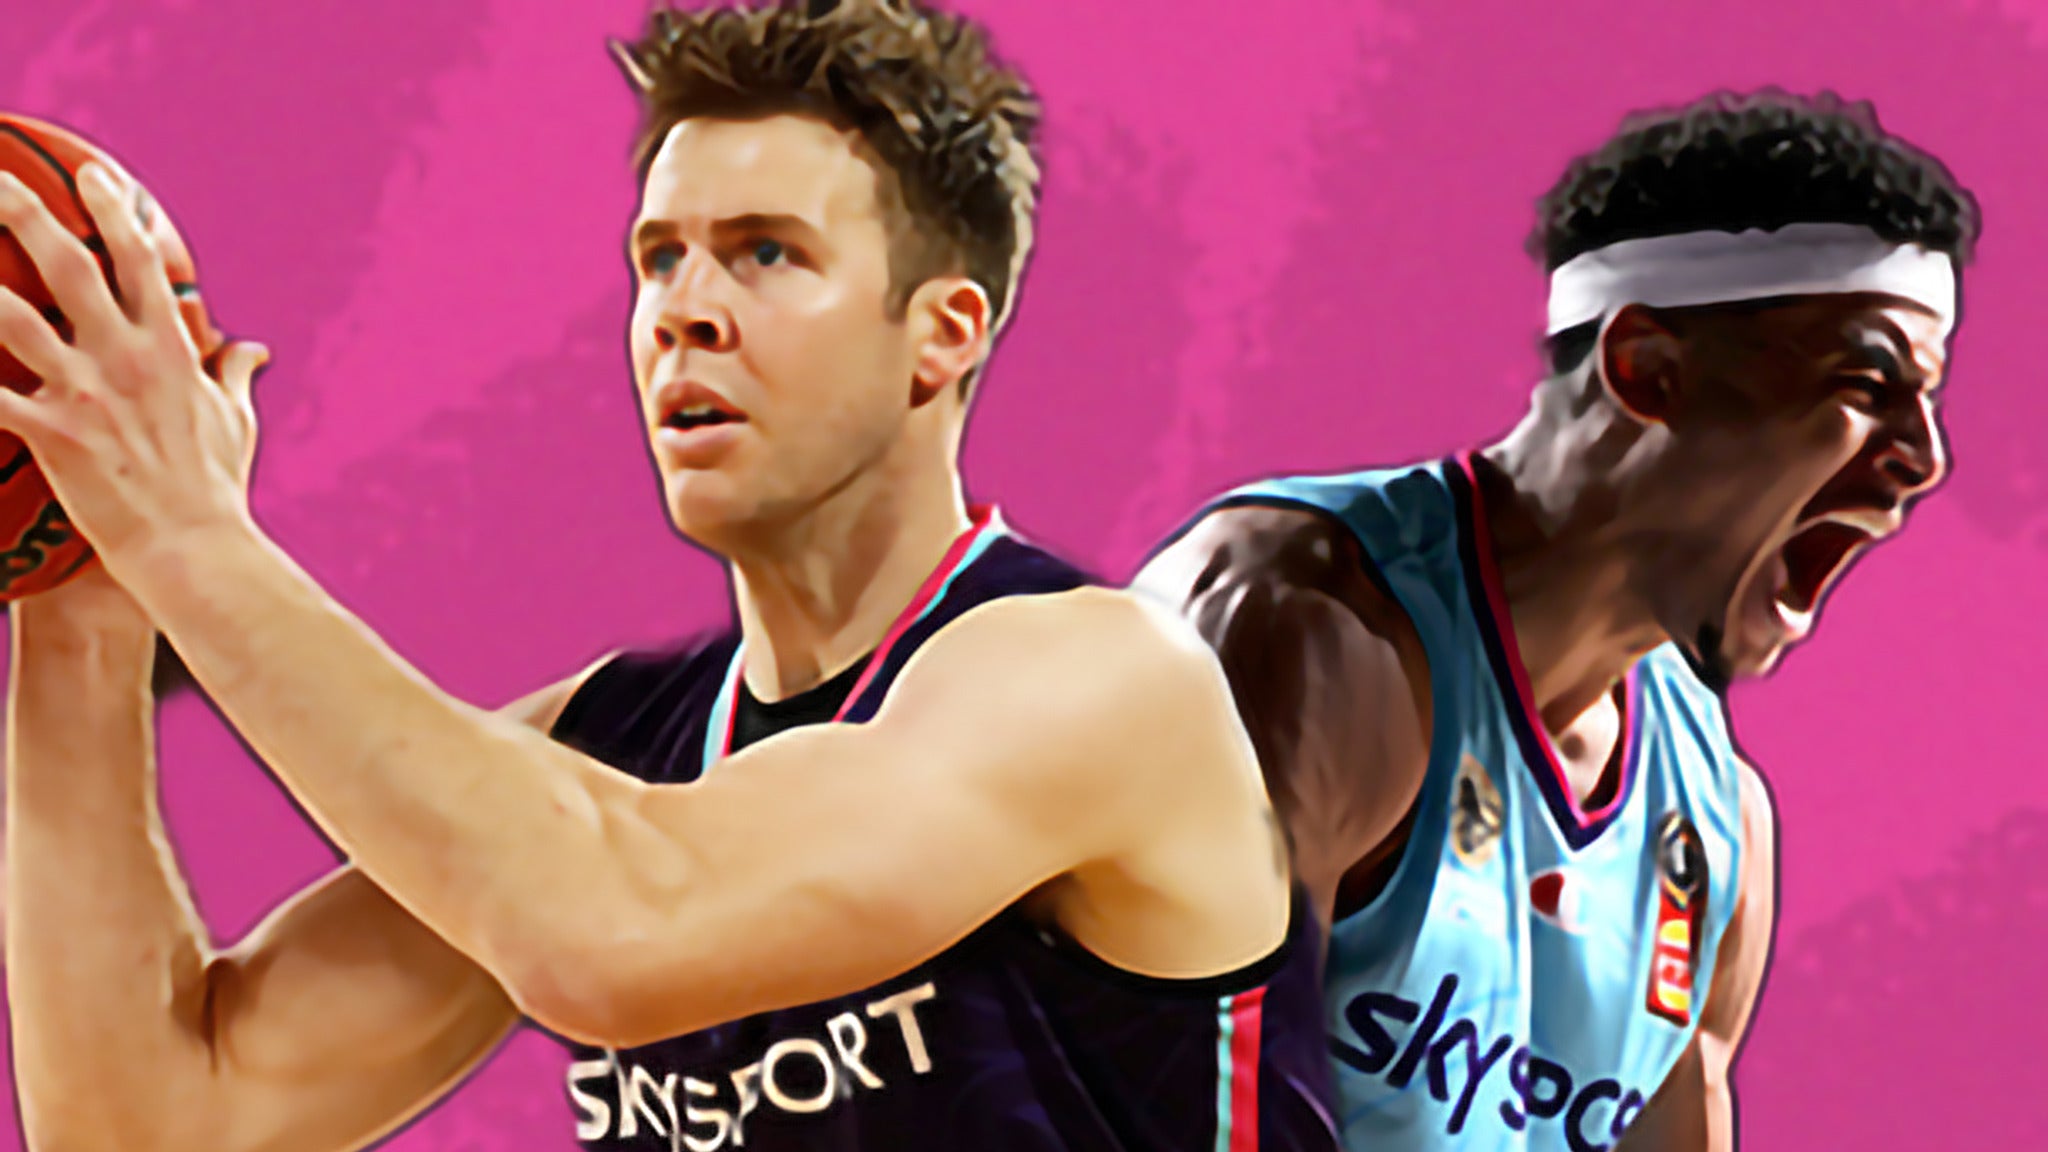 Image used with permission from Ticketmaster | Sky Sport Breakers v Brisbane Bullets tickets